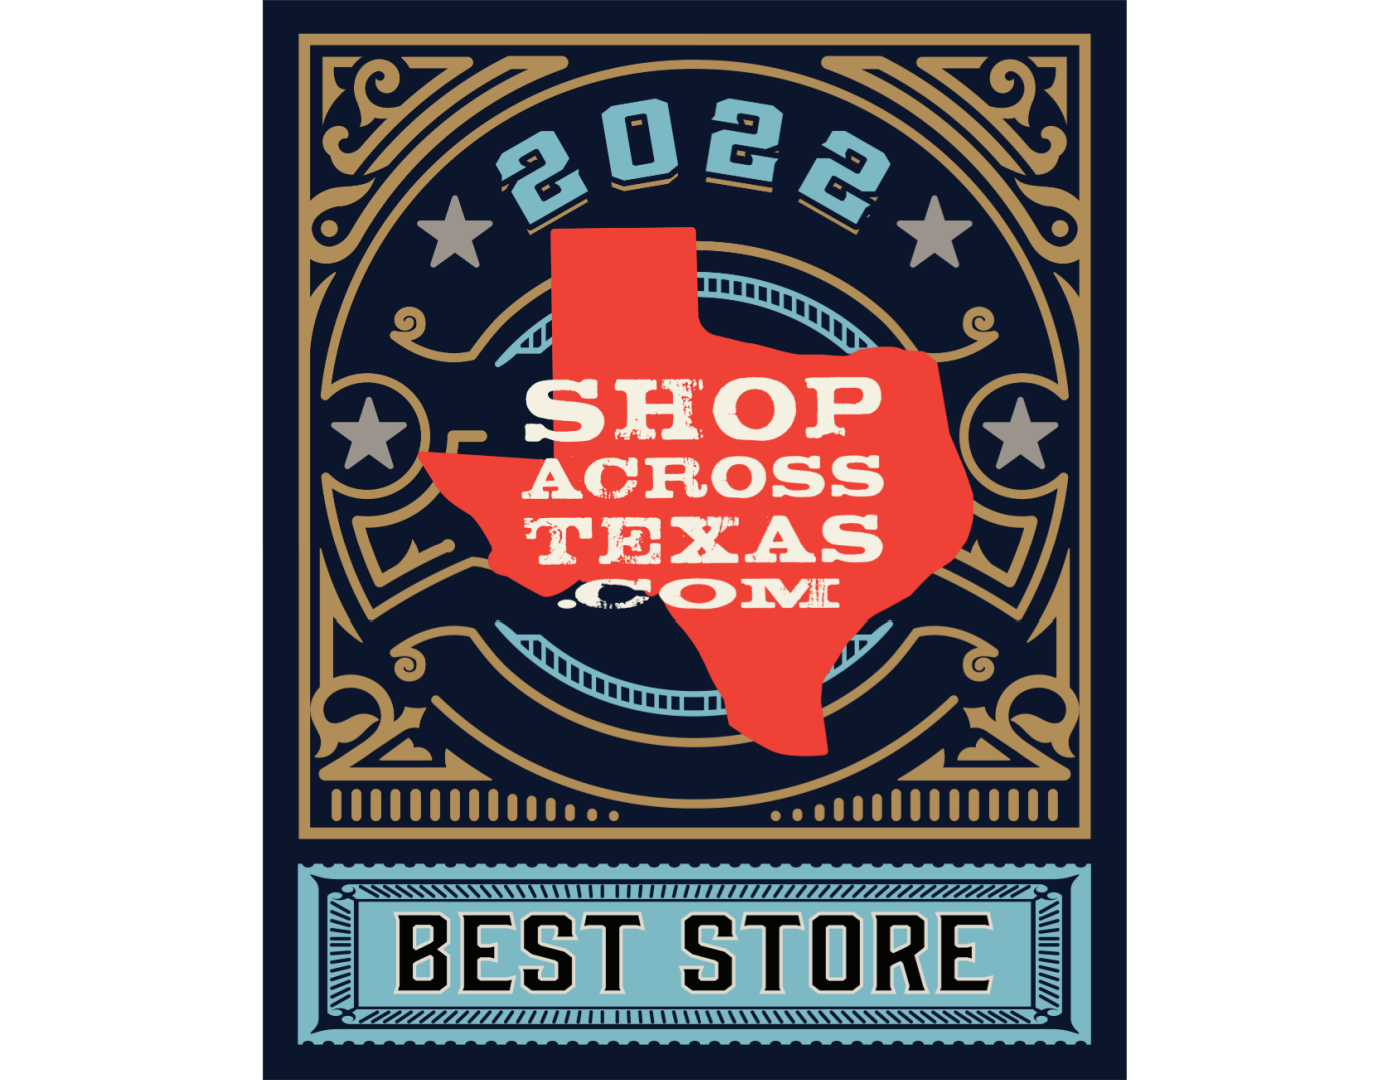 Award for Best Store by Shop Across Texas